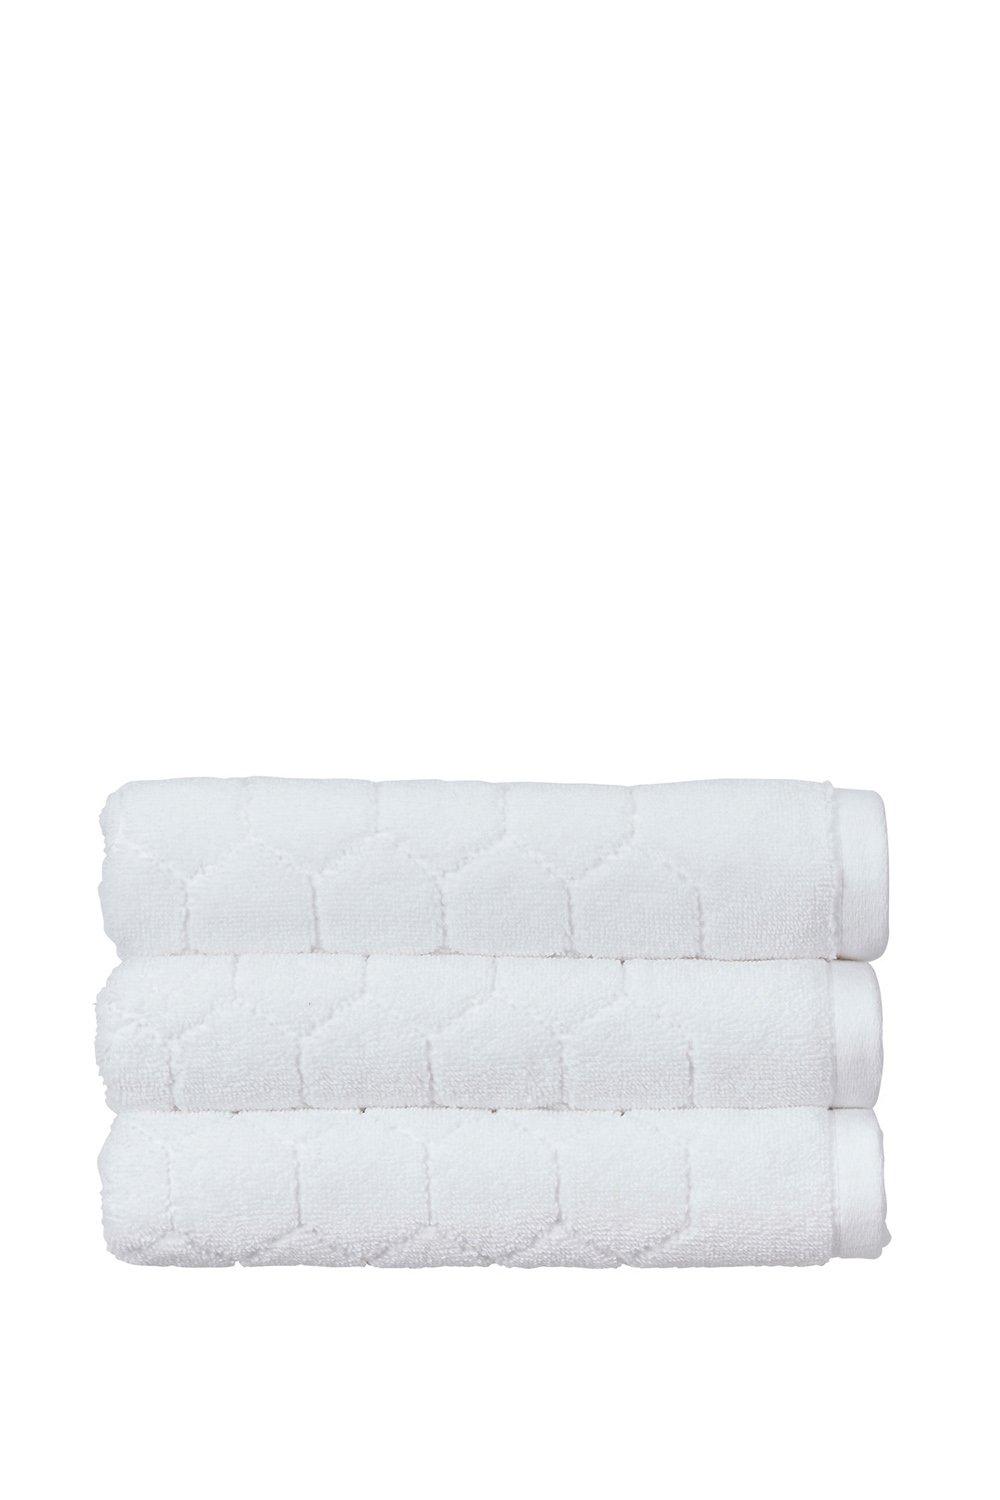 Picture of Honeycomb Bath Sheet